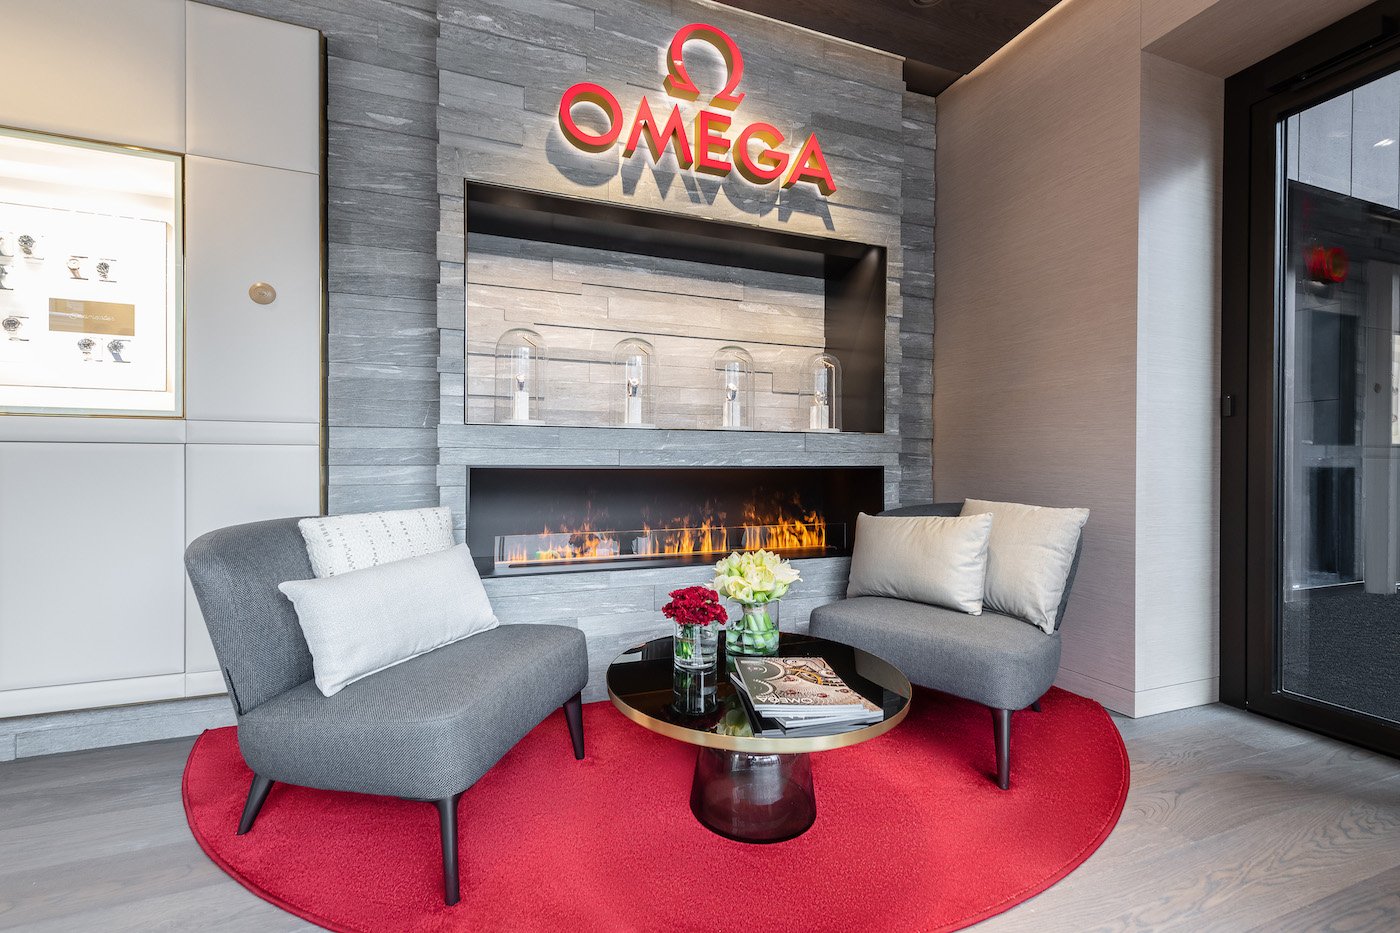 Omega opens a new boutique in St. Moritz